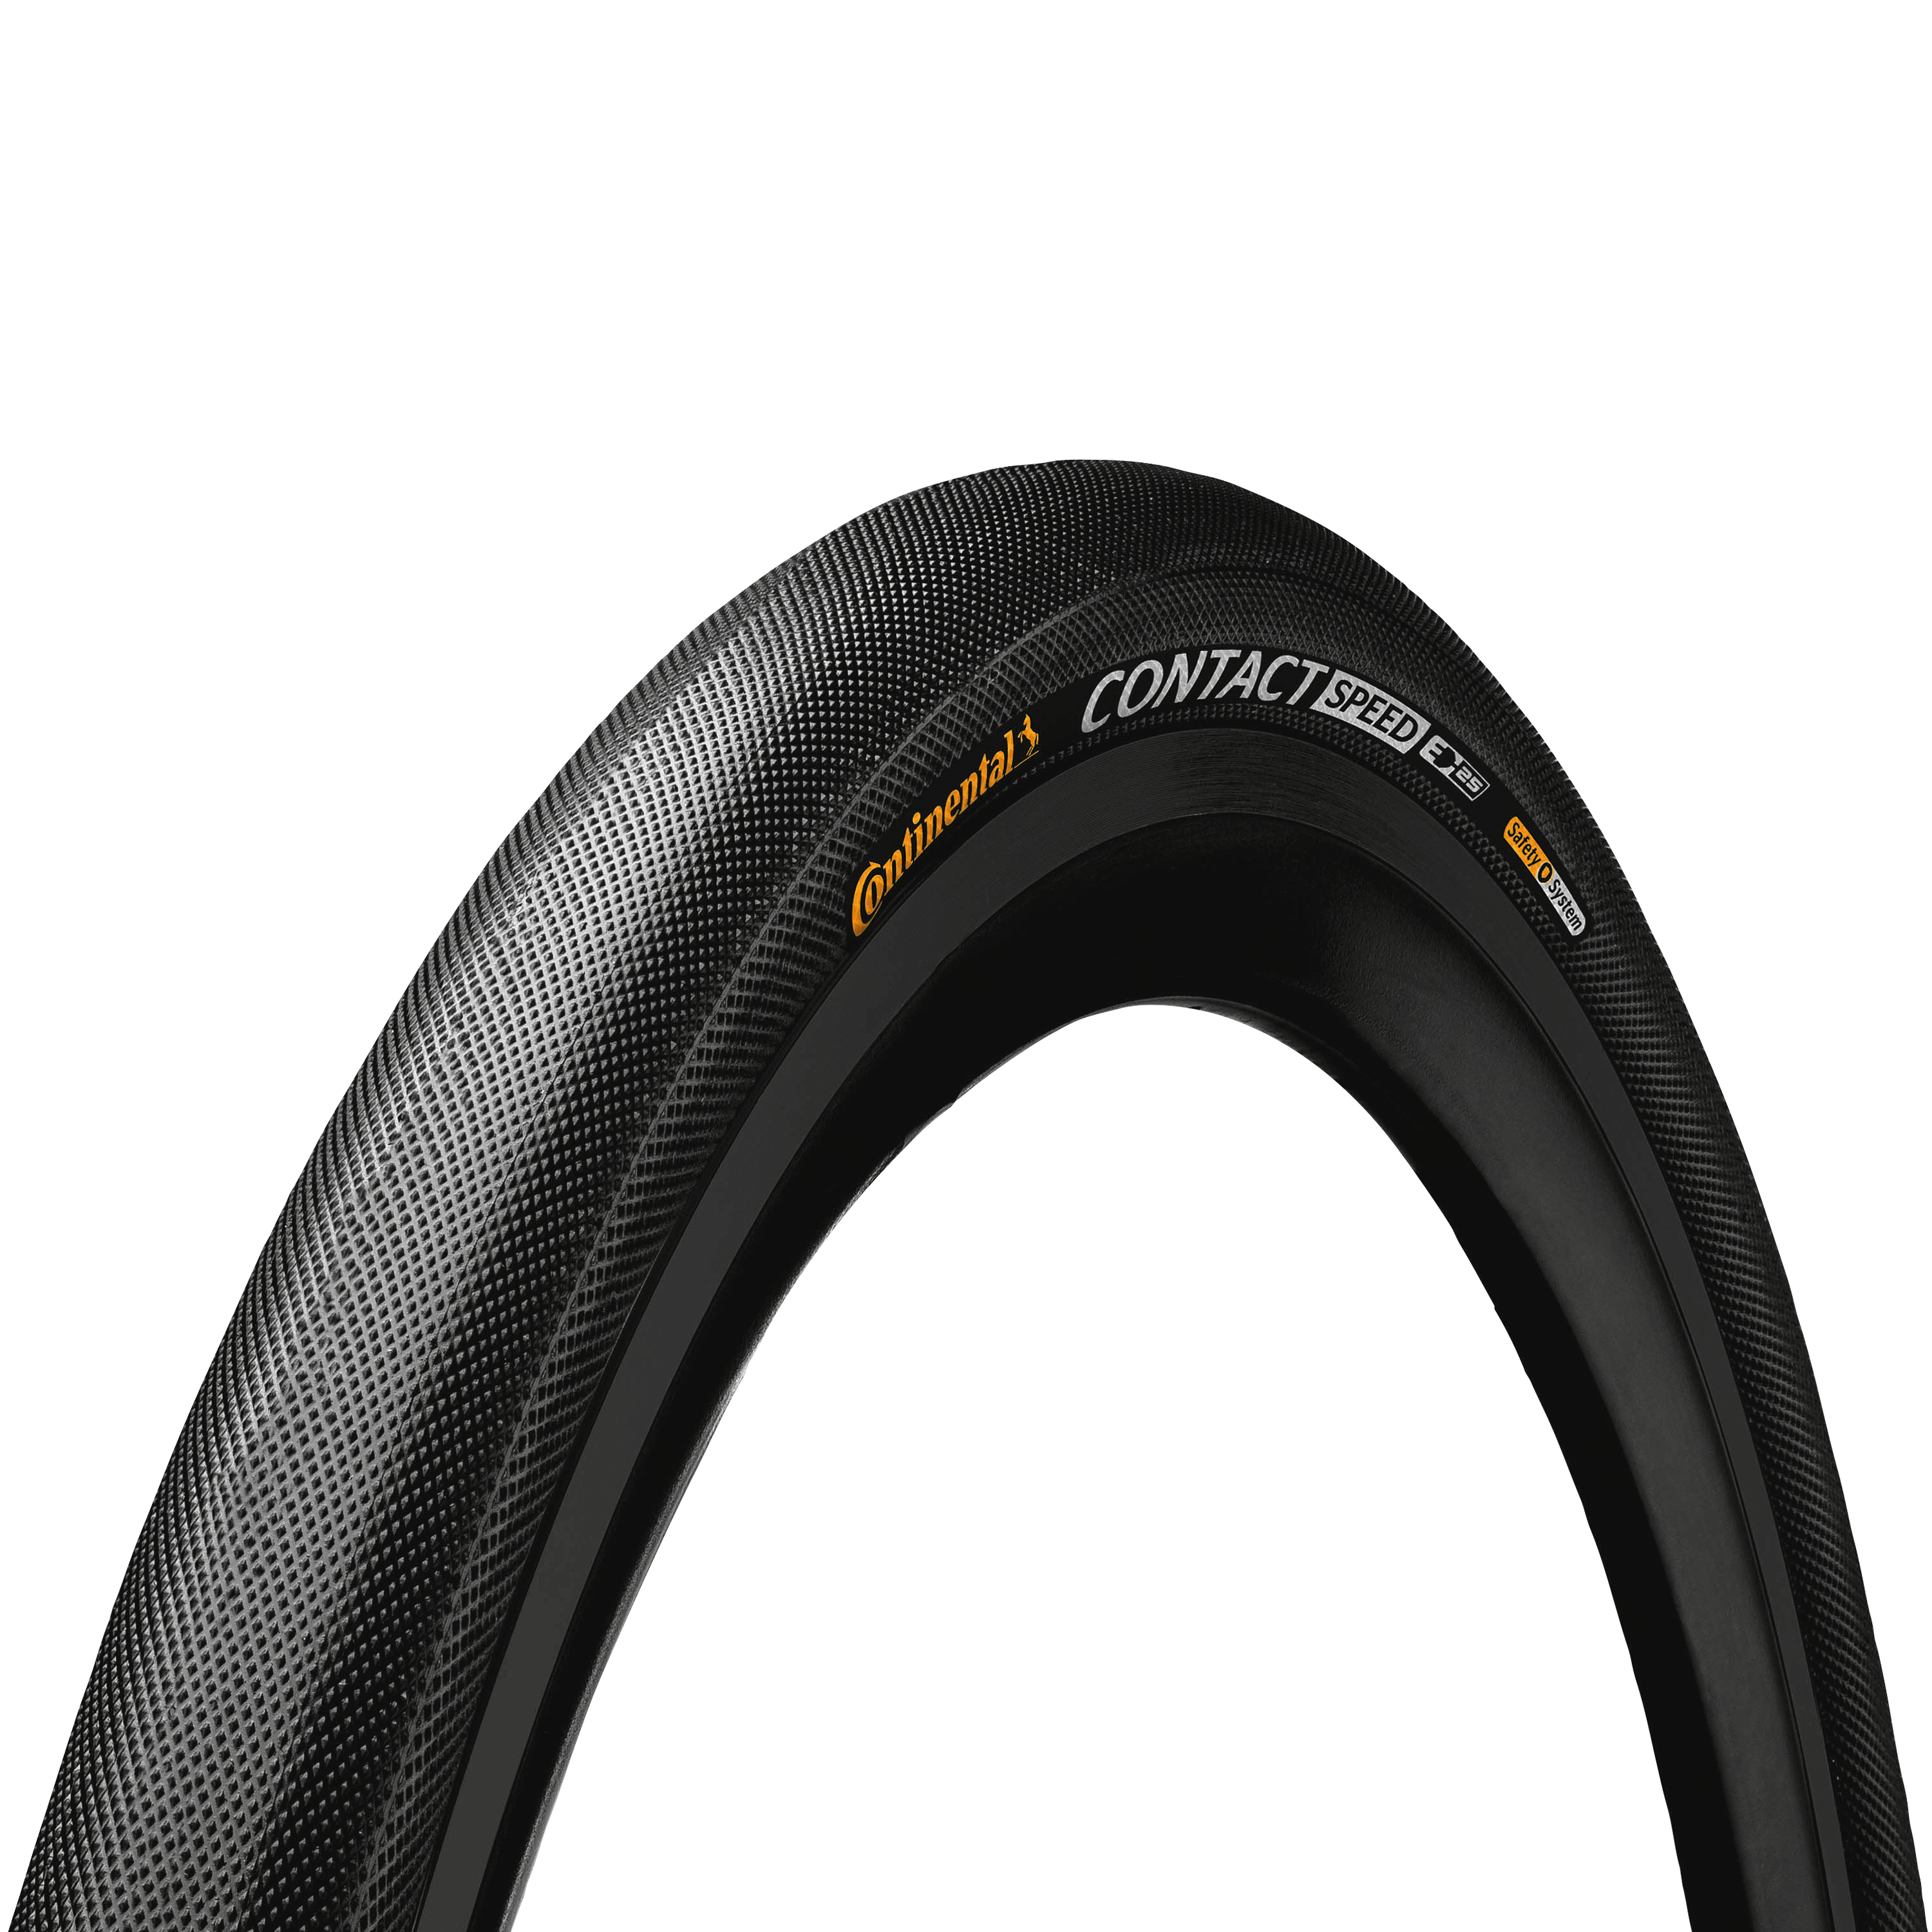 CONTACT Speed: Unites speed and comfort in one tire